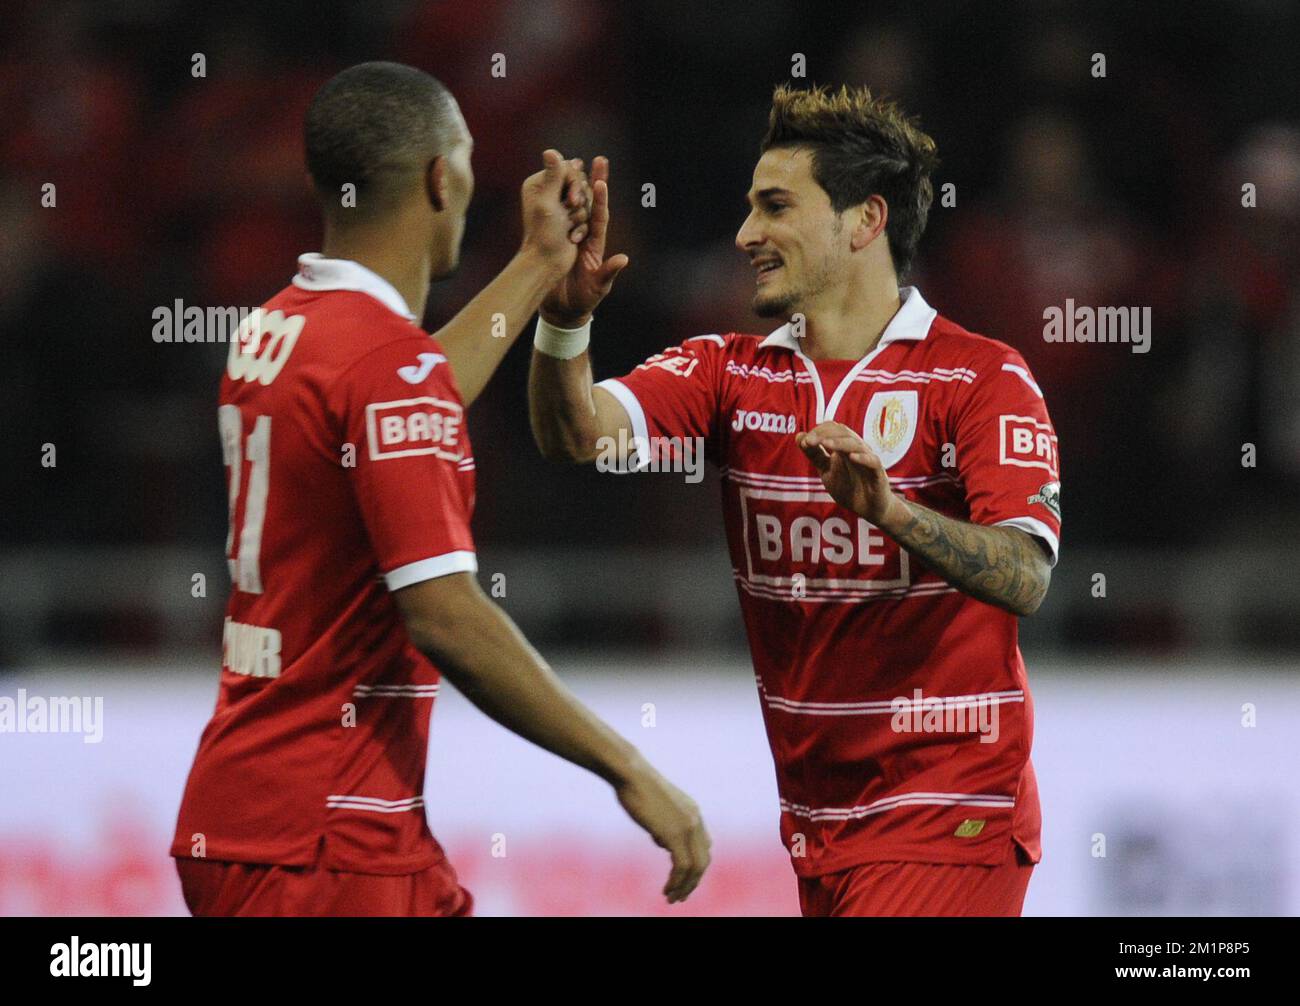 20121207 - LIEGE, BELGIUM: Standard's Maor Bar Buzaglo (R) celebrates after scoring the 3-0 goal during the Jupiler Pro League match between Standard and Charleroi, in Liege, Friday 07 December 2012, on day 19 of the Belgian soccer championship. BELGA PHOTO JOHN THYS Stock Photo